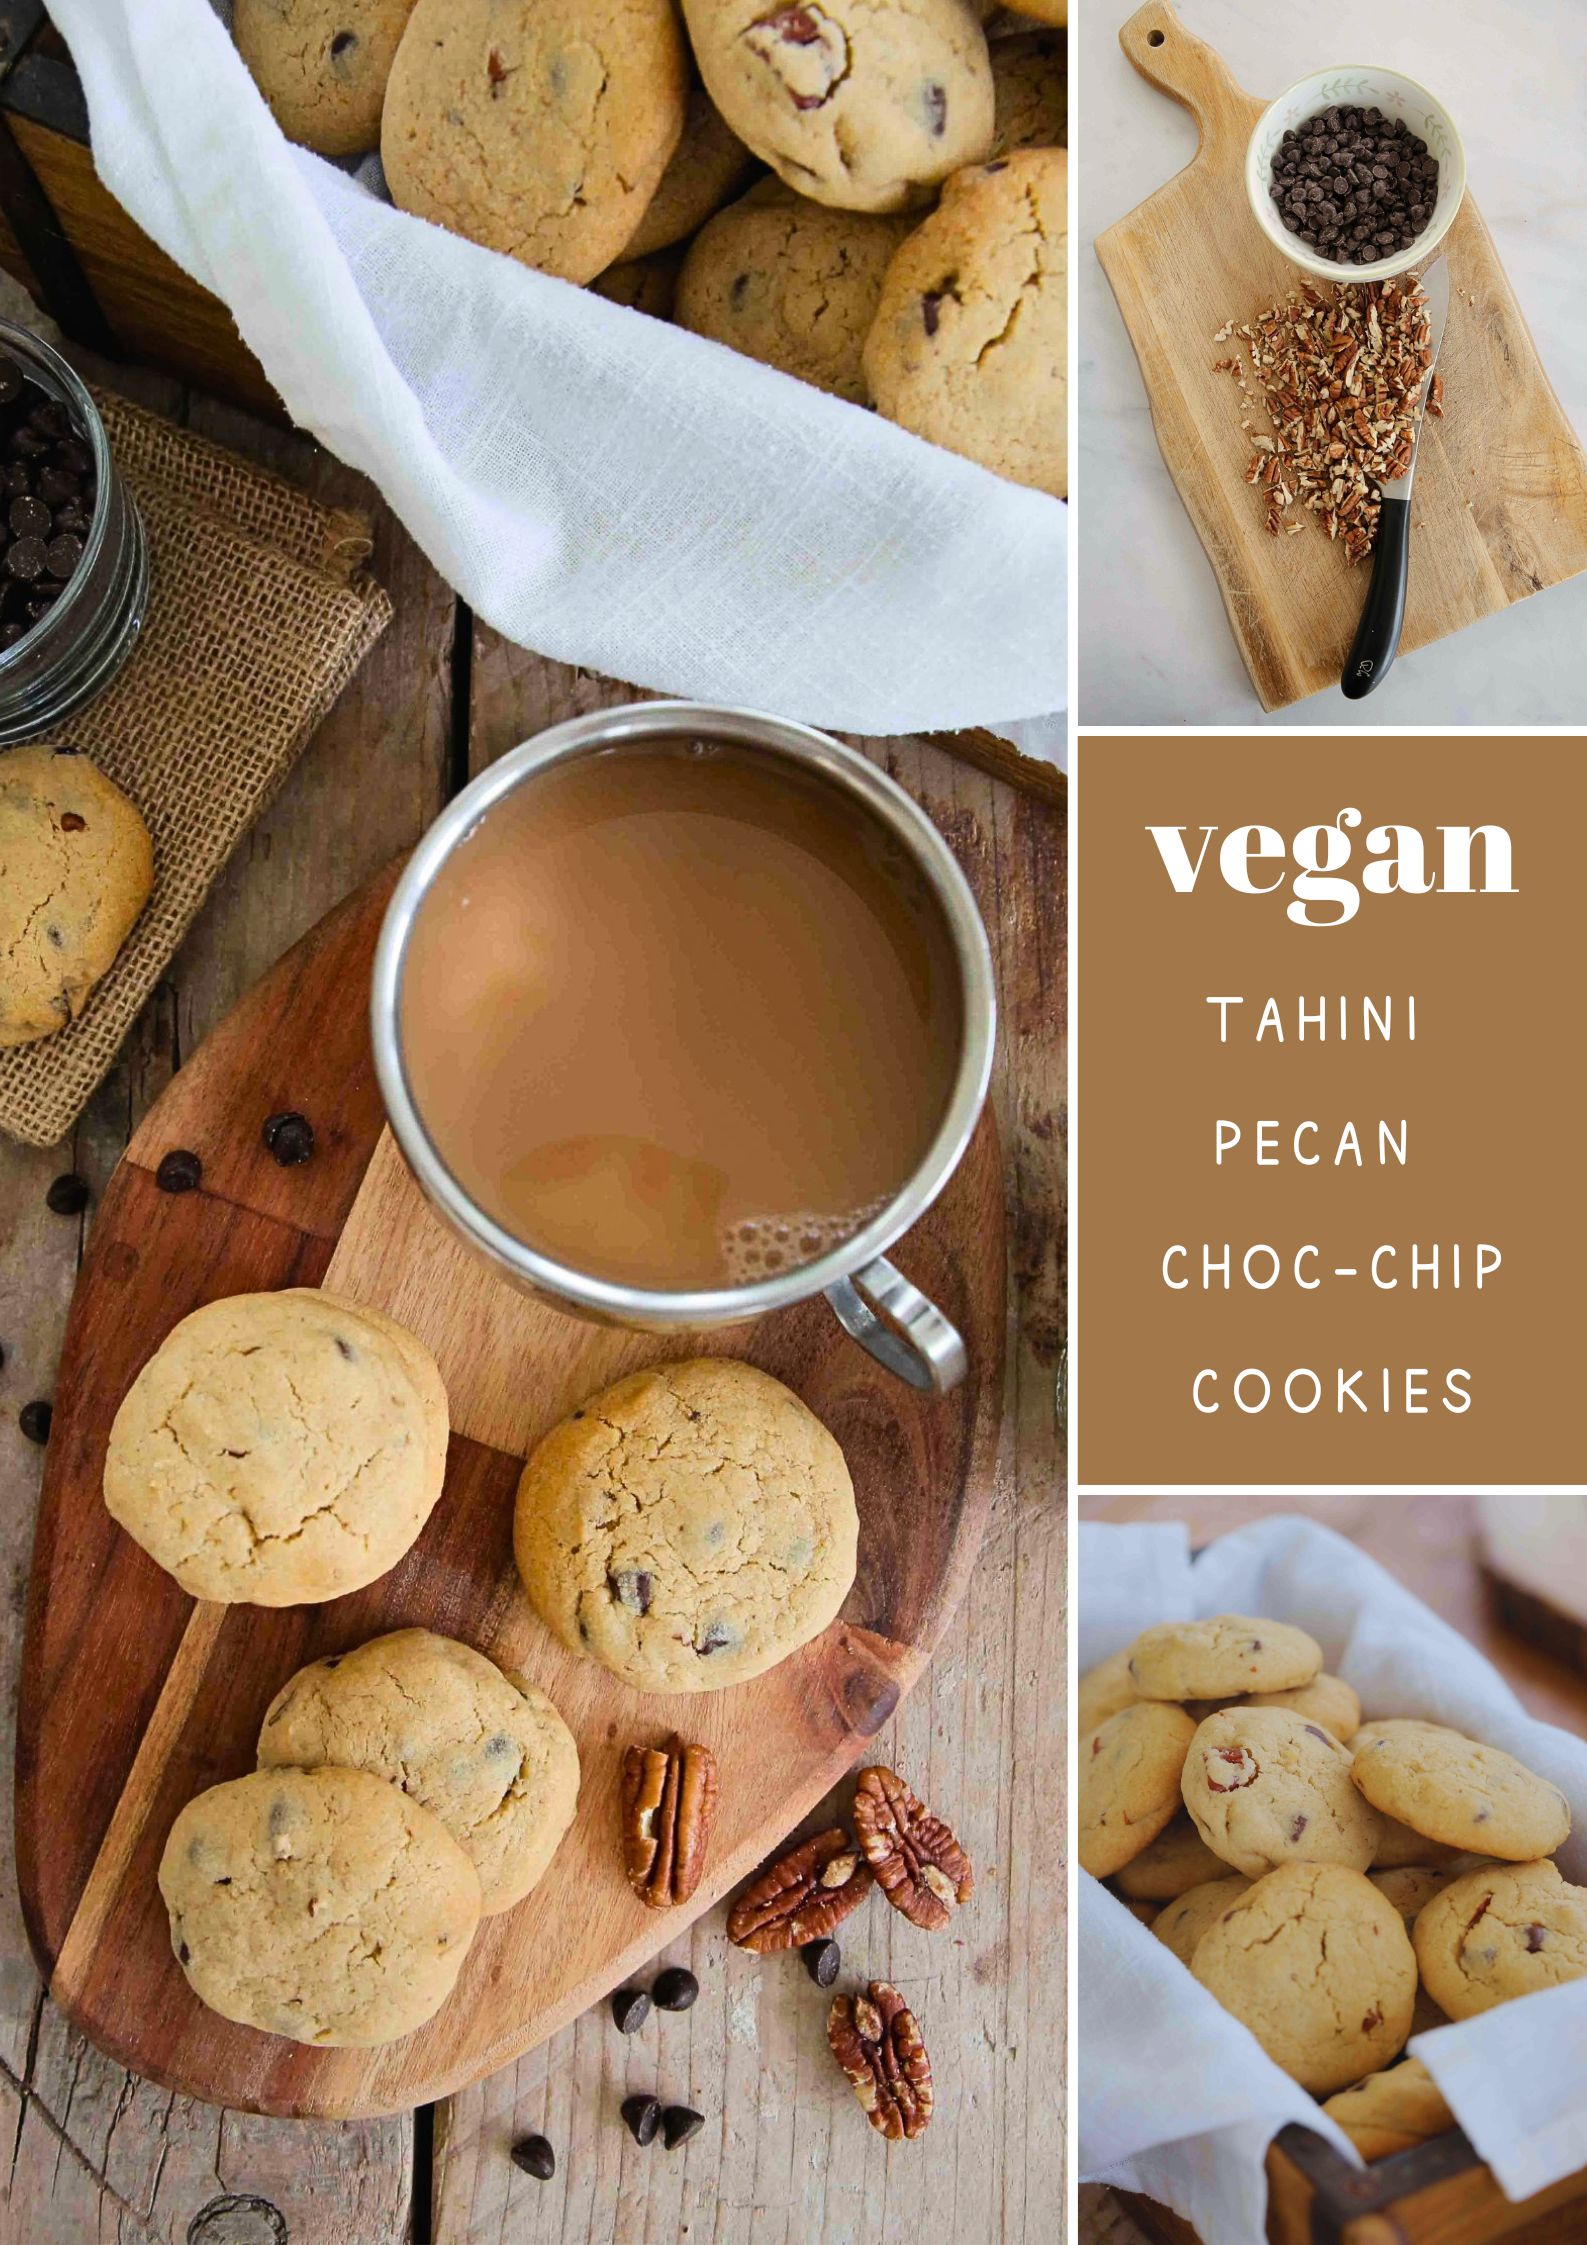 These chewy vegan choc chip cookies with tahini and pecans are super easy to make with simple ingredients and take less than 15 minutes to bake! Recipe on thecookandhim | #vegancookies #veganchocchipcookies #brownsugarcookies #chewychocchipcookies #egglesscookies